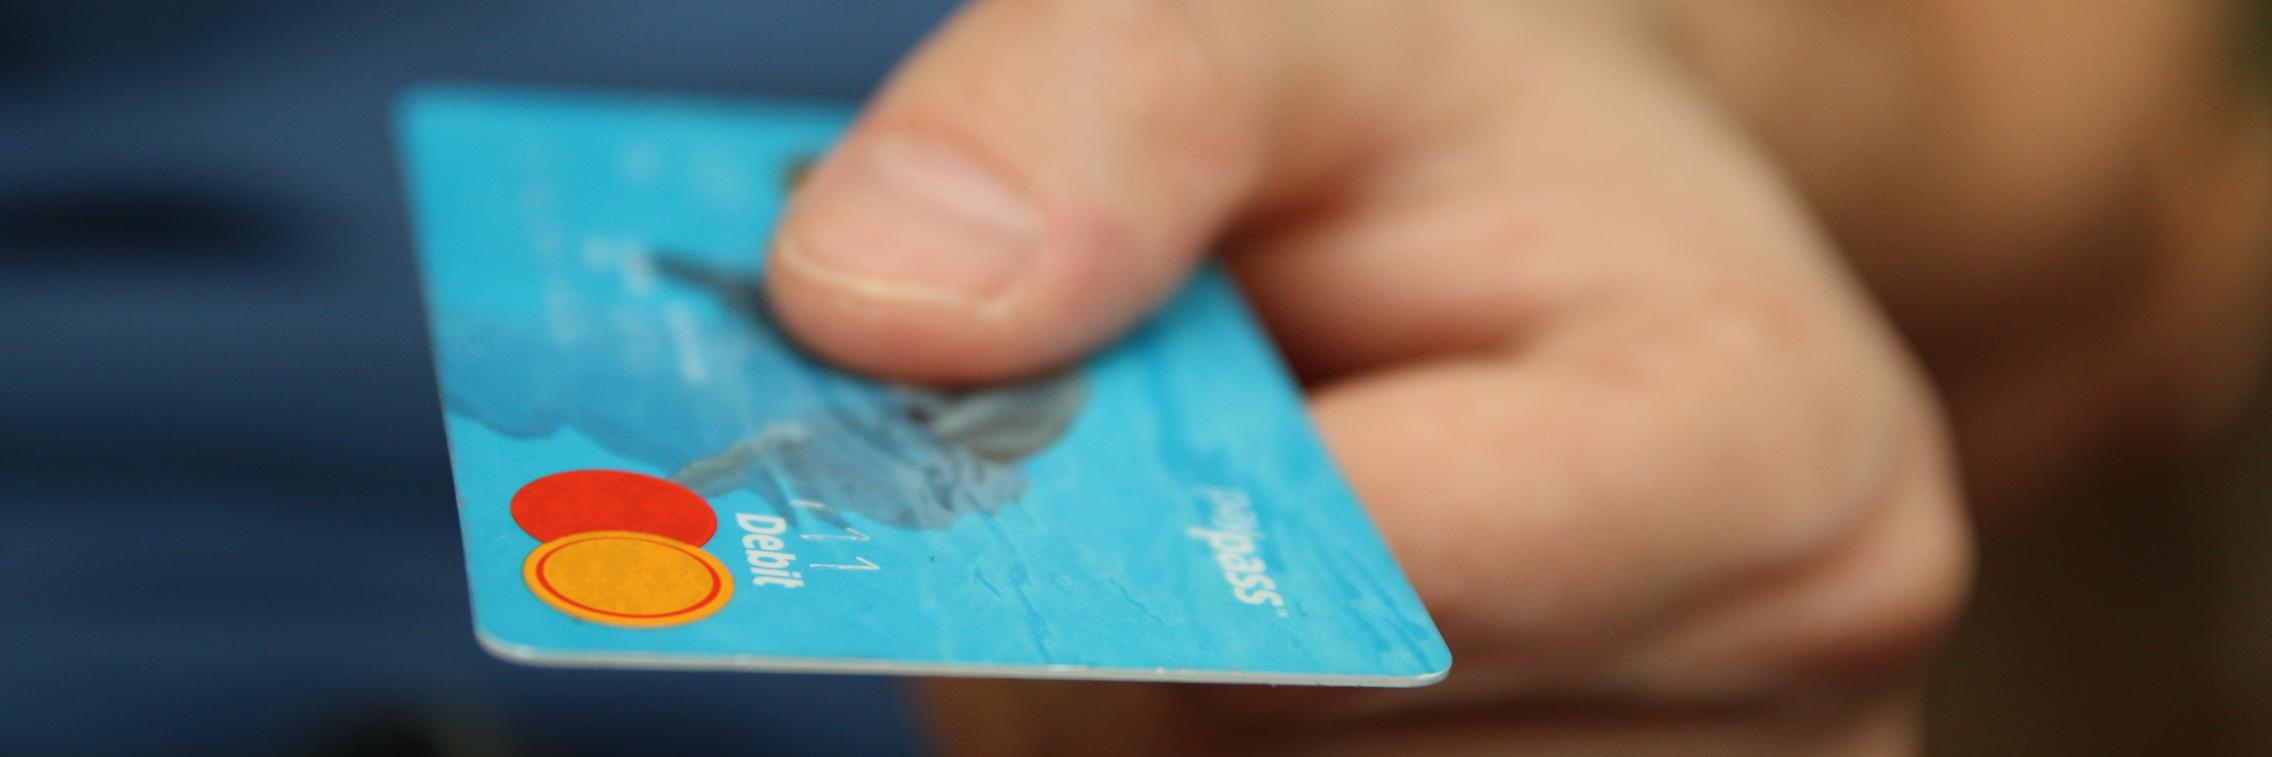 Man's hand holding out a credit card